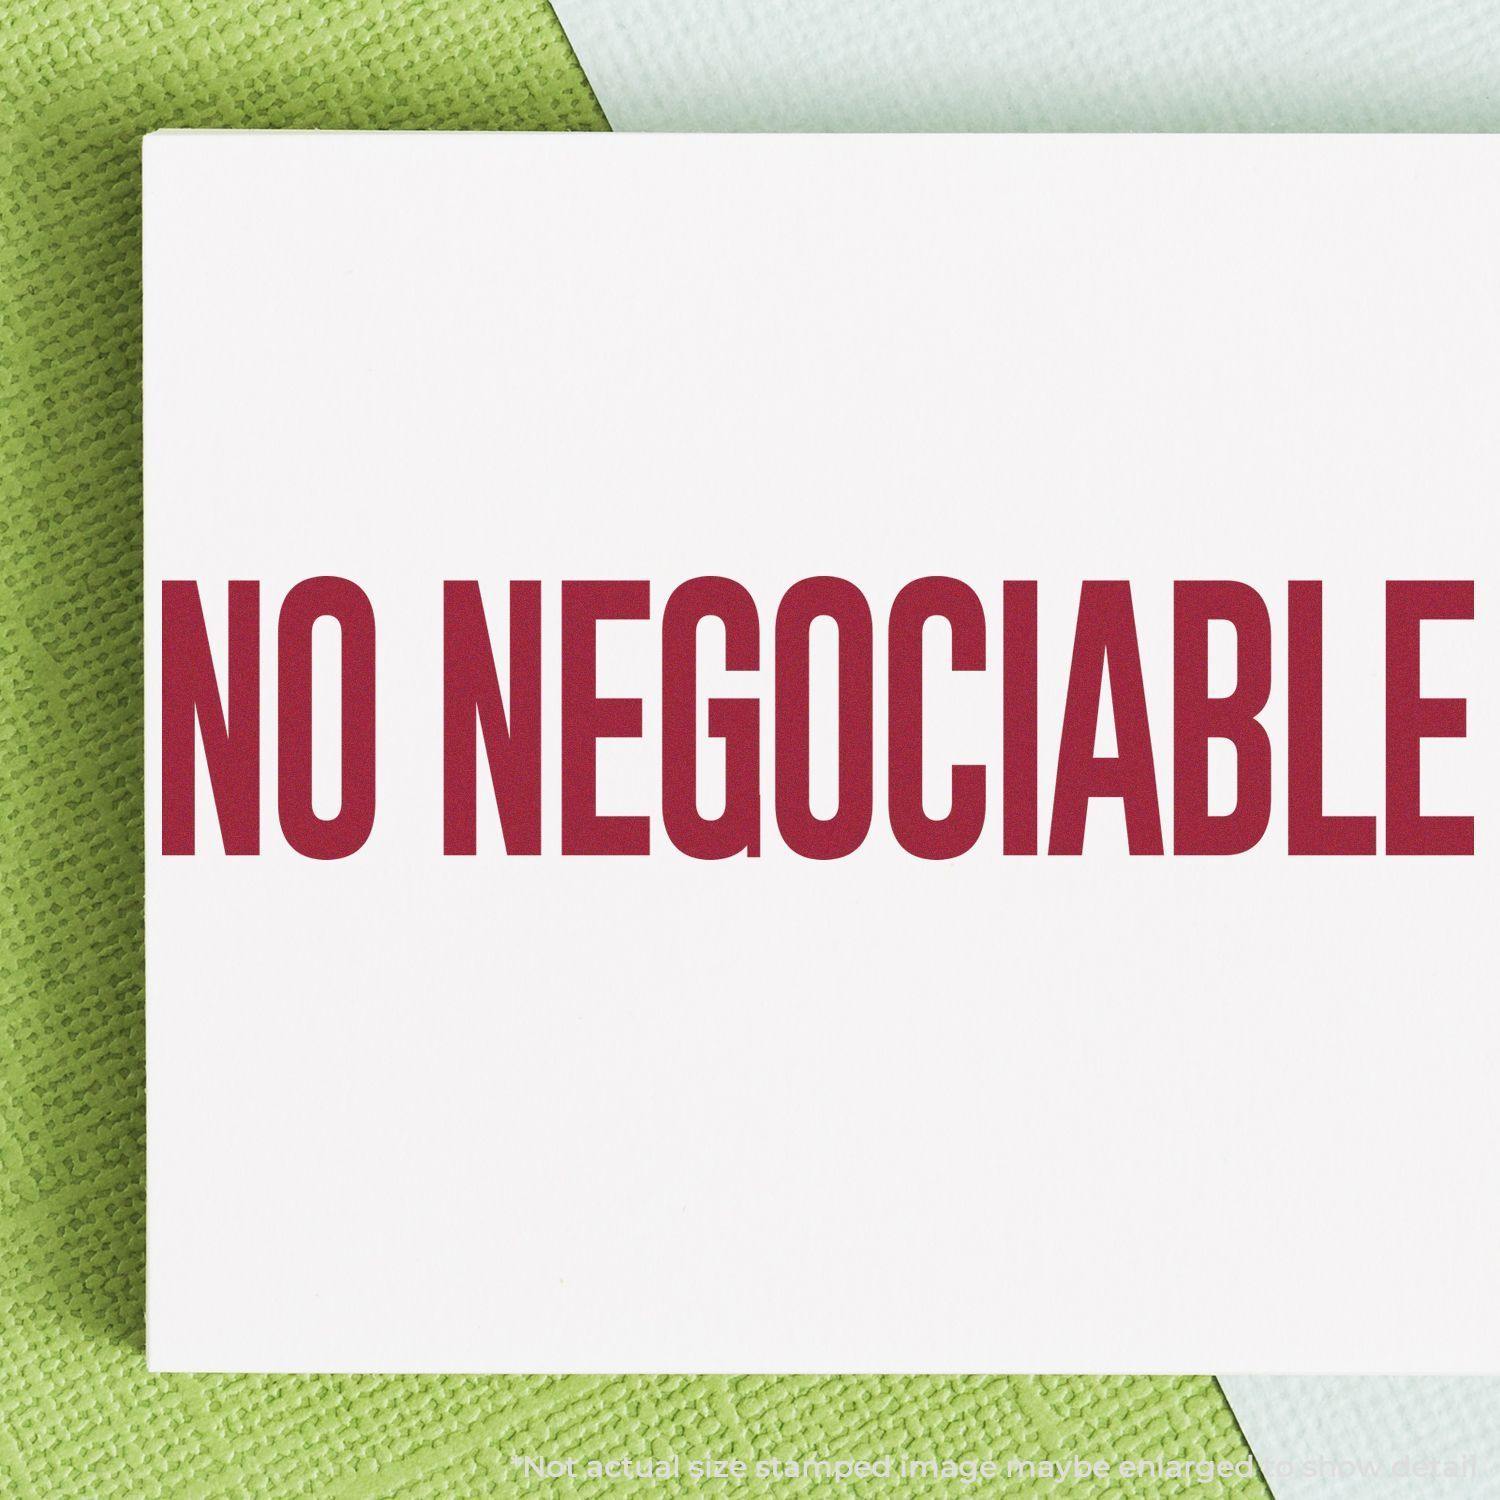 A stock office rubber stamp with a stamped image showing how the text "NO NEGOCIABLE" is displayed after stamping.